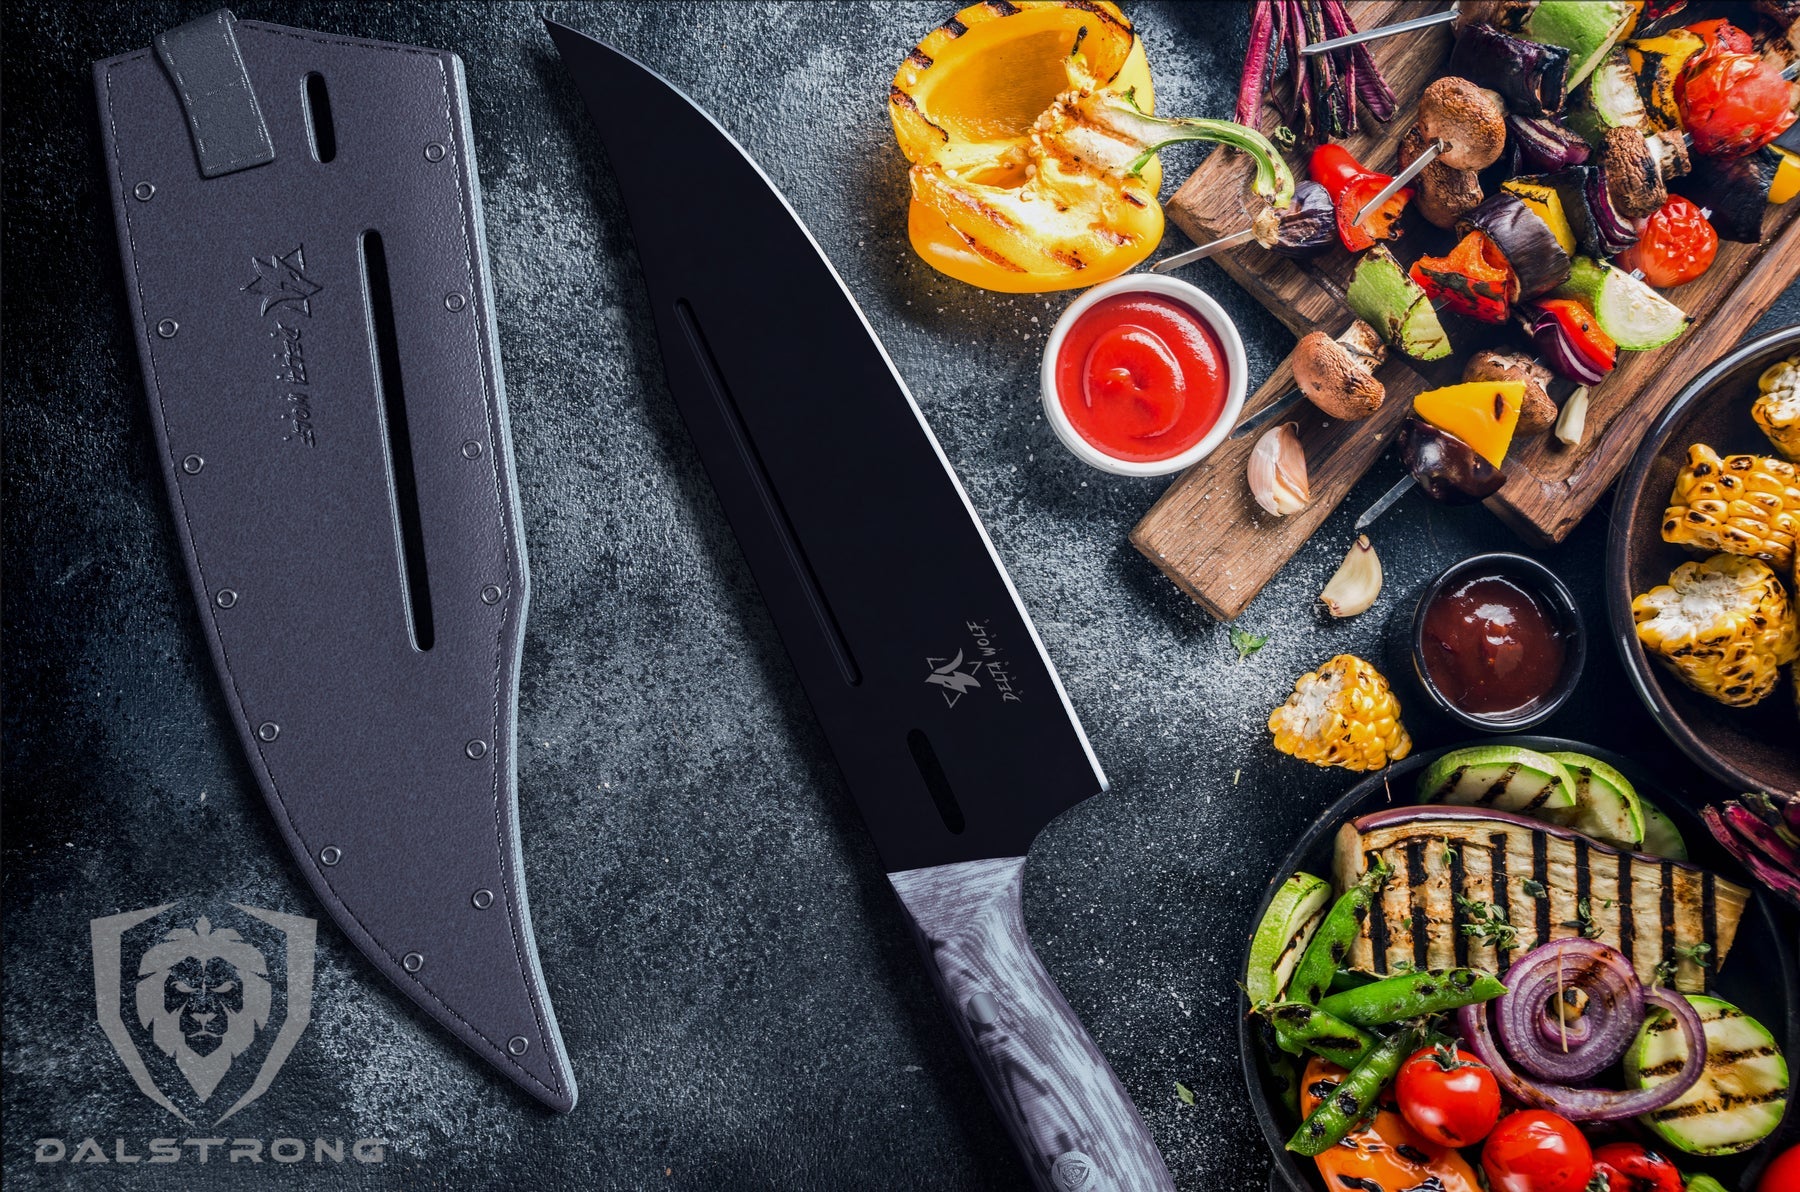 Dalstrong vs. Coolina Knives: Which Brand Should You Go With?